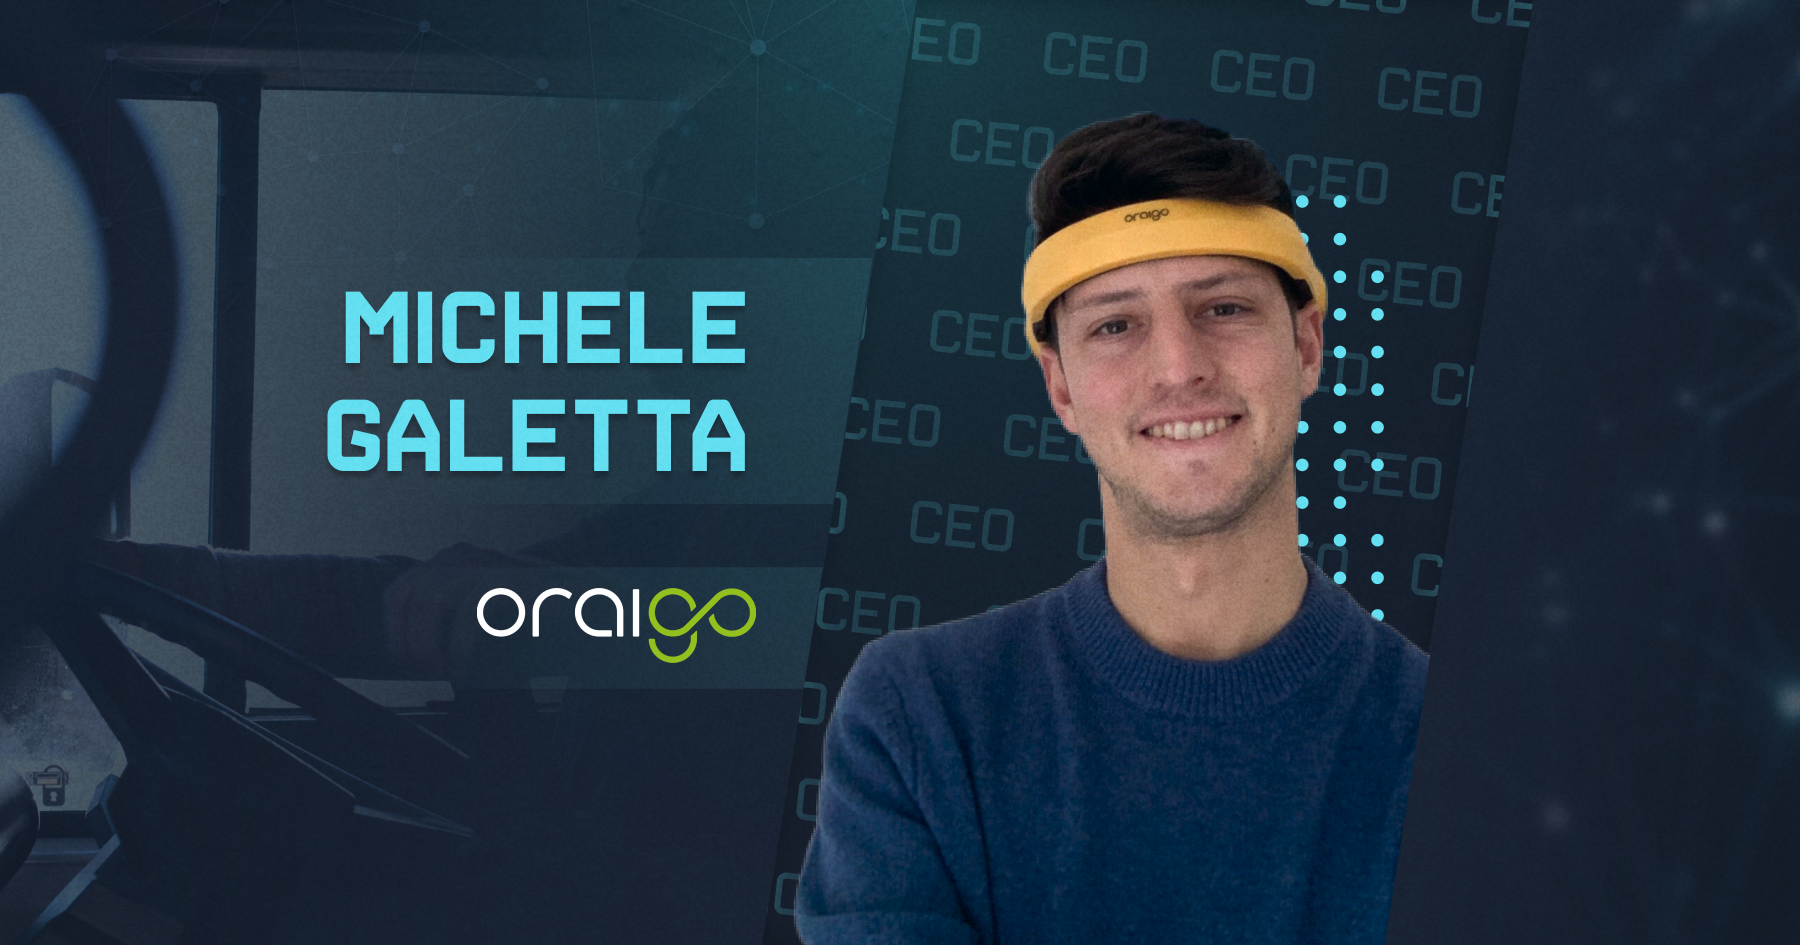 Oraigo Co-founder & CEO Michele Galetta: Integrating Neurotech and AI for Safer Driving